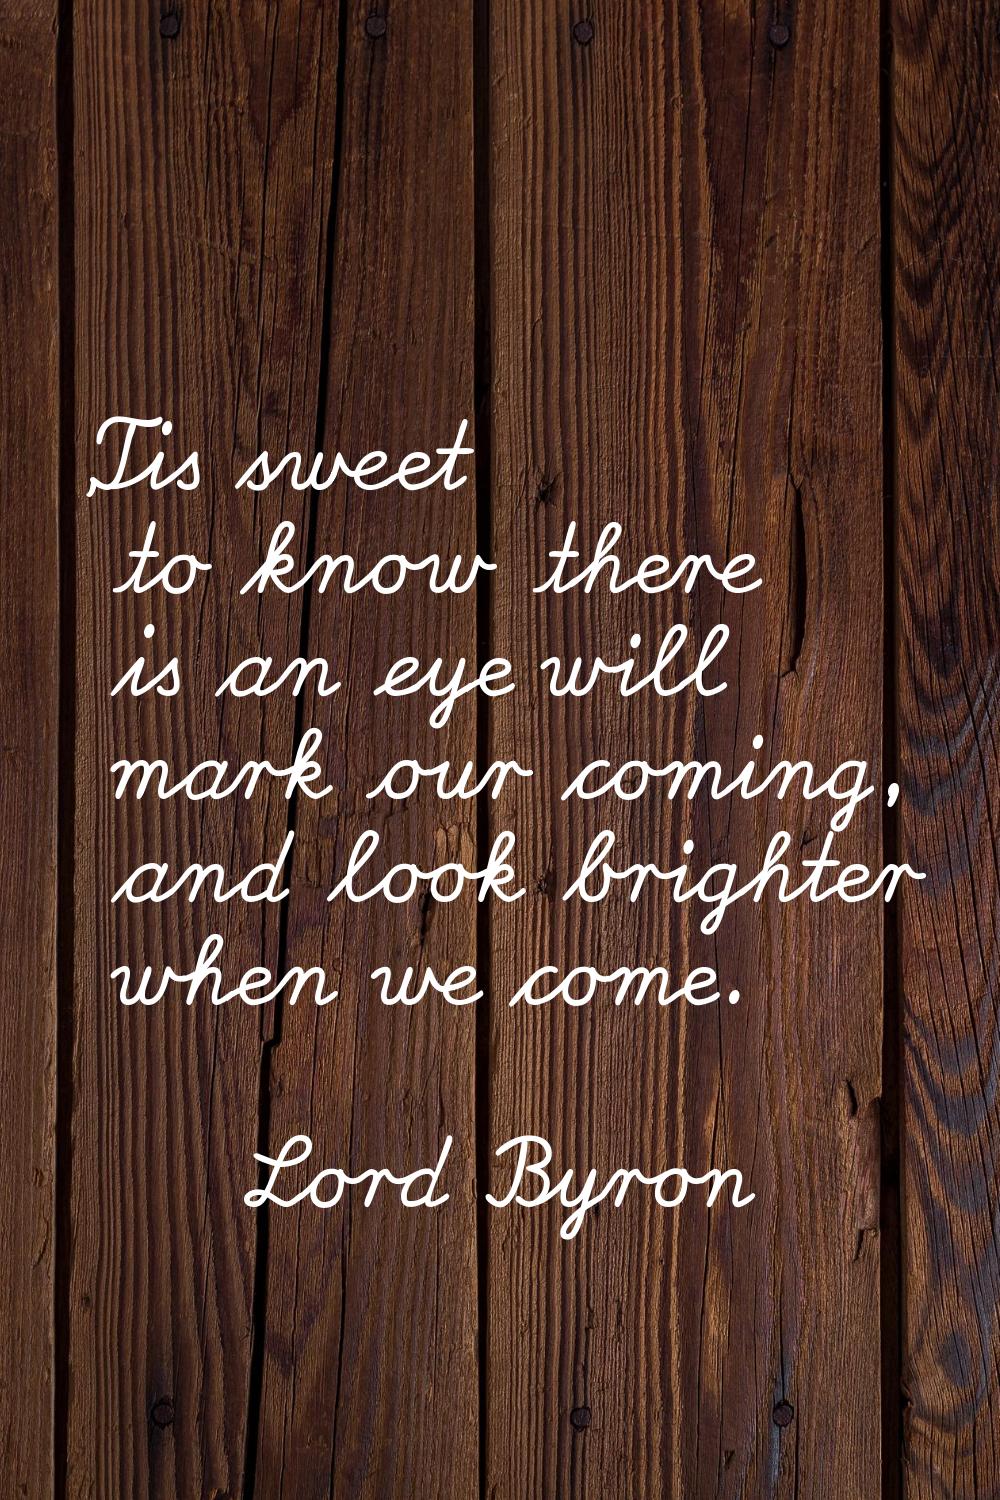 'Tis sweet to know there is an eye will mark our coming, and look brighter when we come.